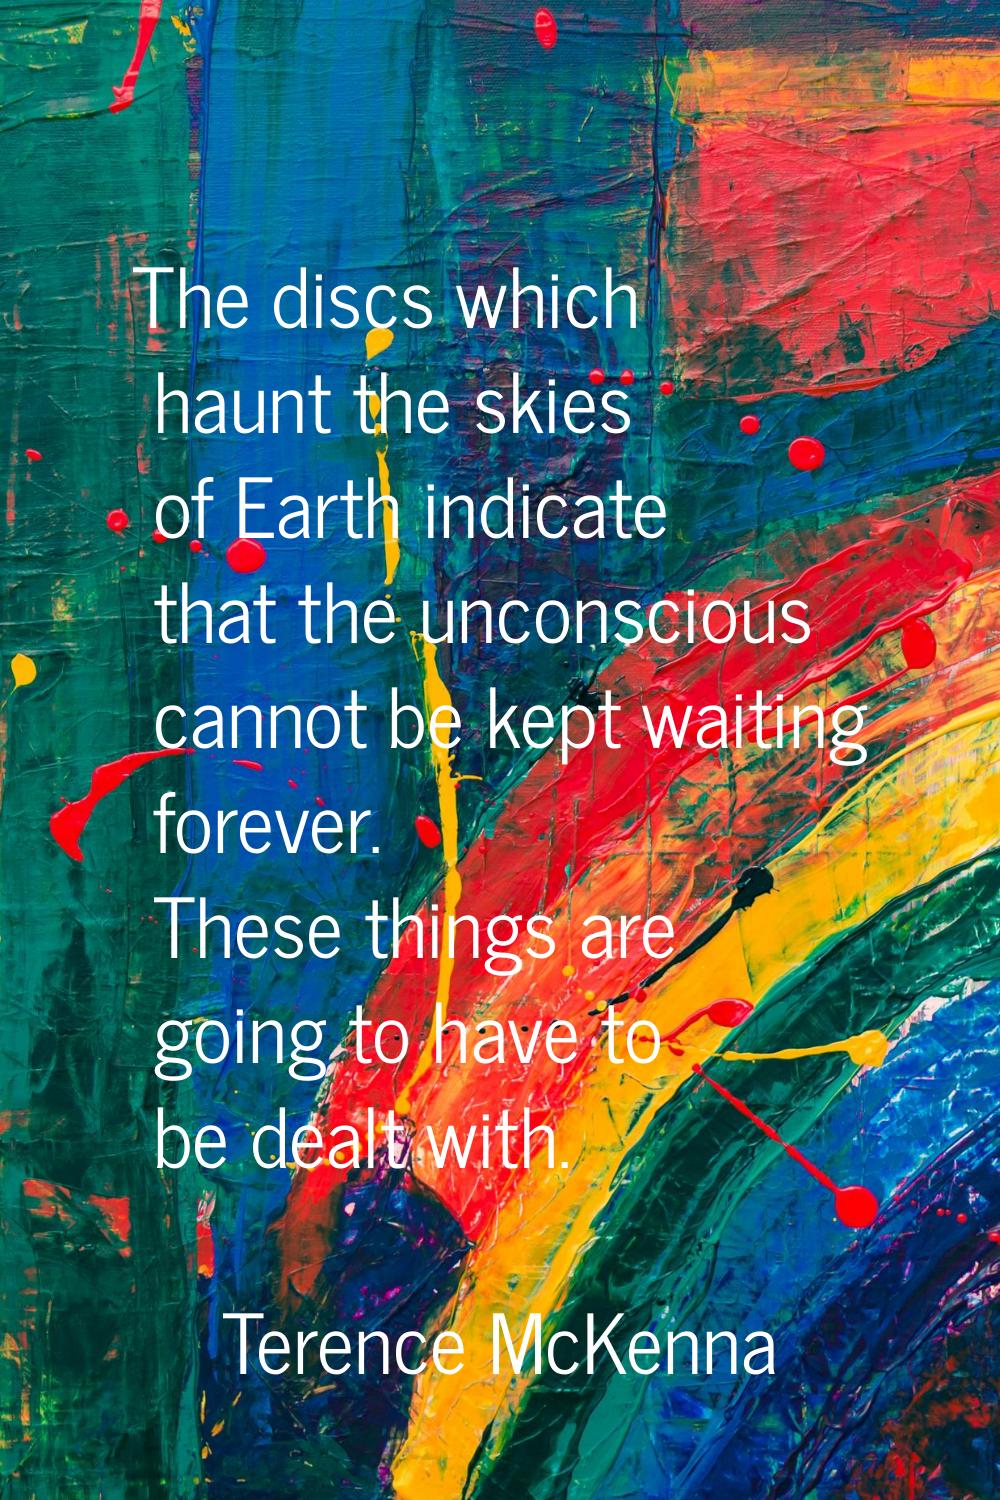 The discs which haunt the skies of Earth indicate that the unconscious cannot be kept waiting forev